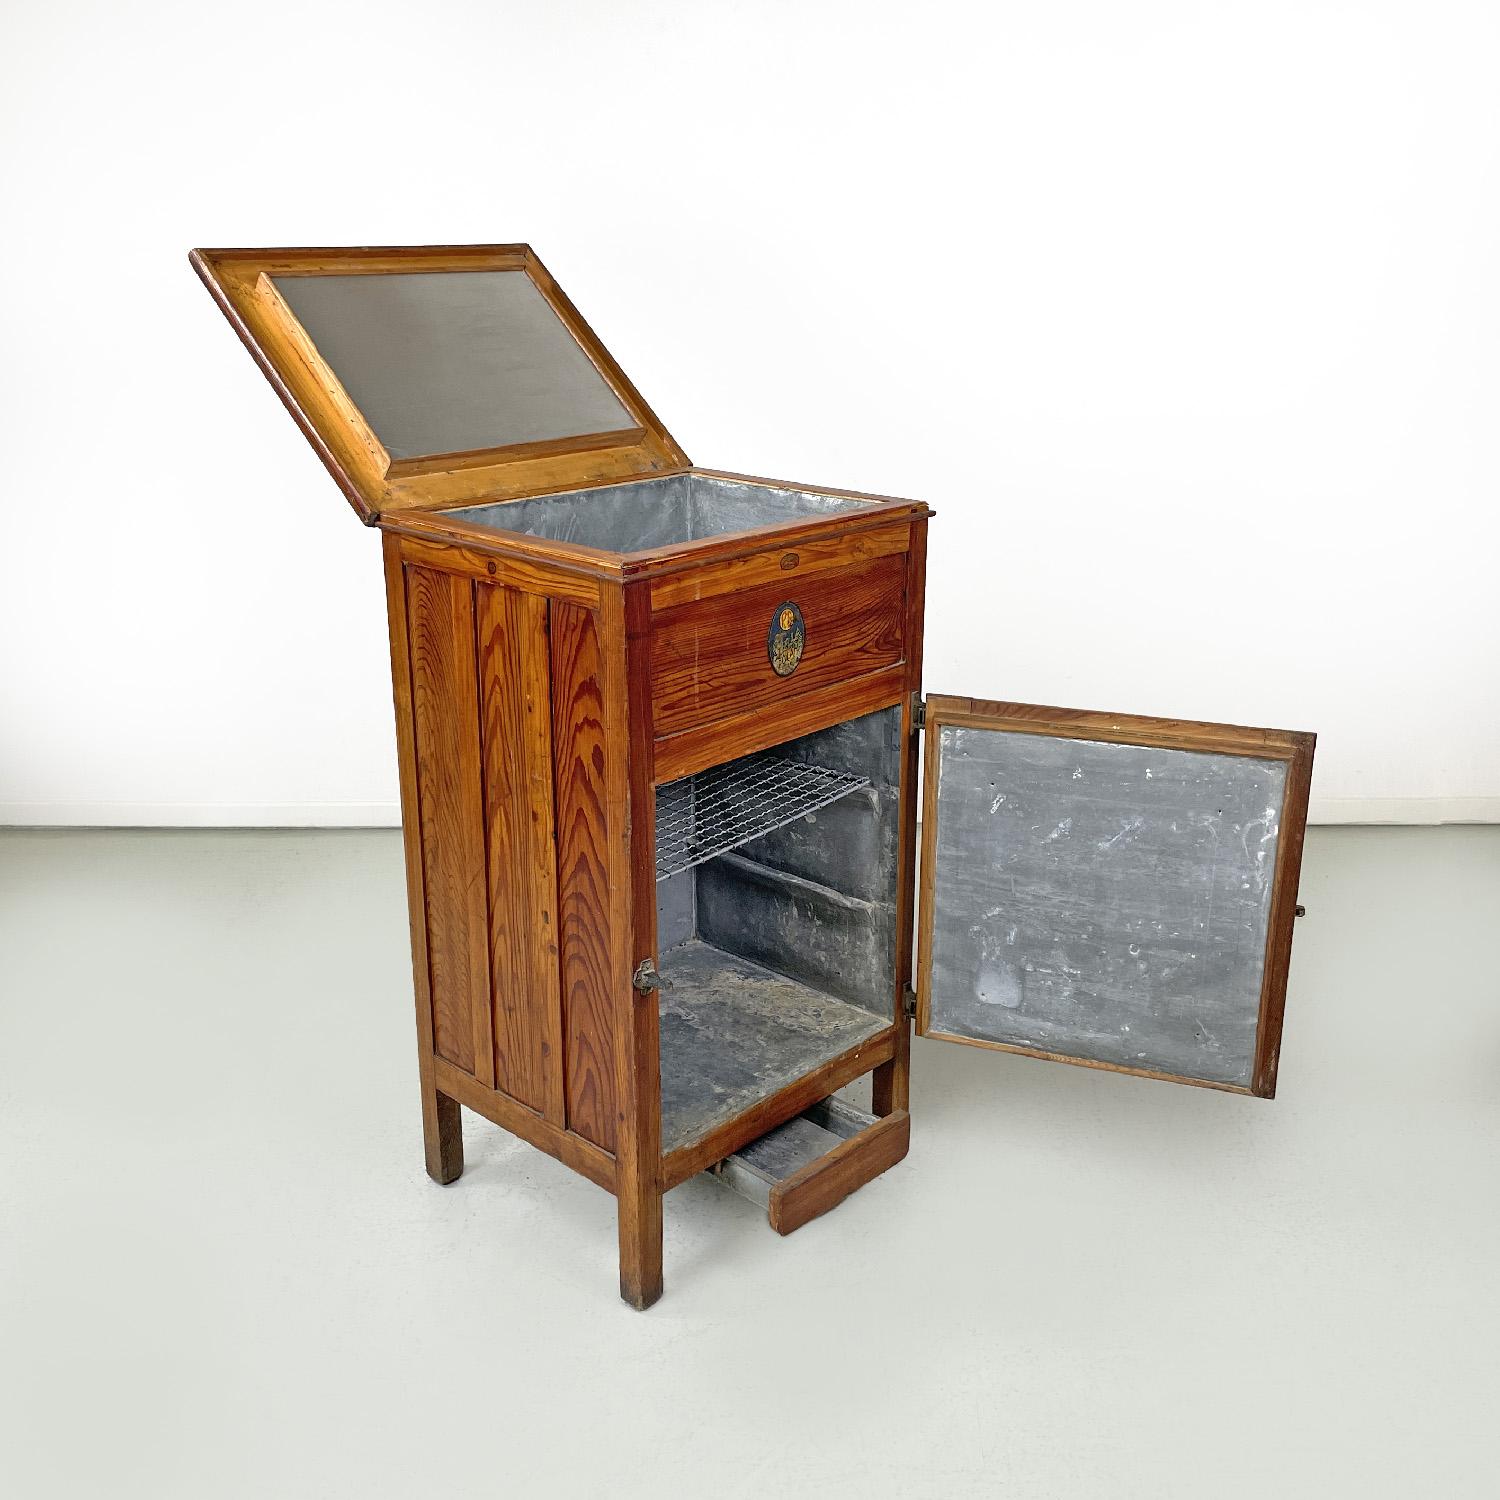 Italian modern wooden icebox Stella Polare by G. Saracco Asti, early 1900s
Wooden ice chest with rectangular base. The upper floor is a cockpit opening that opens onto a zinc compartment, the same material with which the entire internal structure is